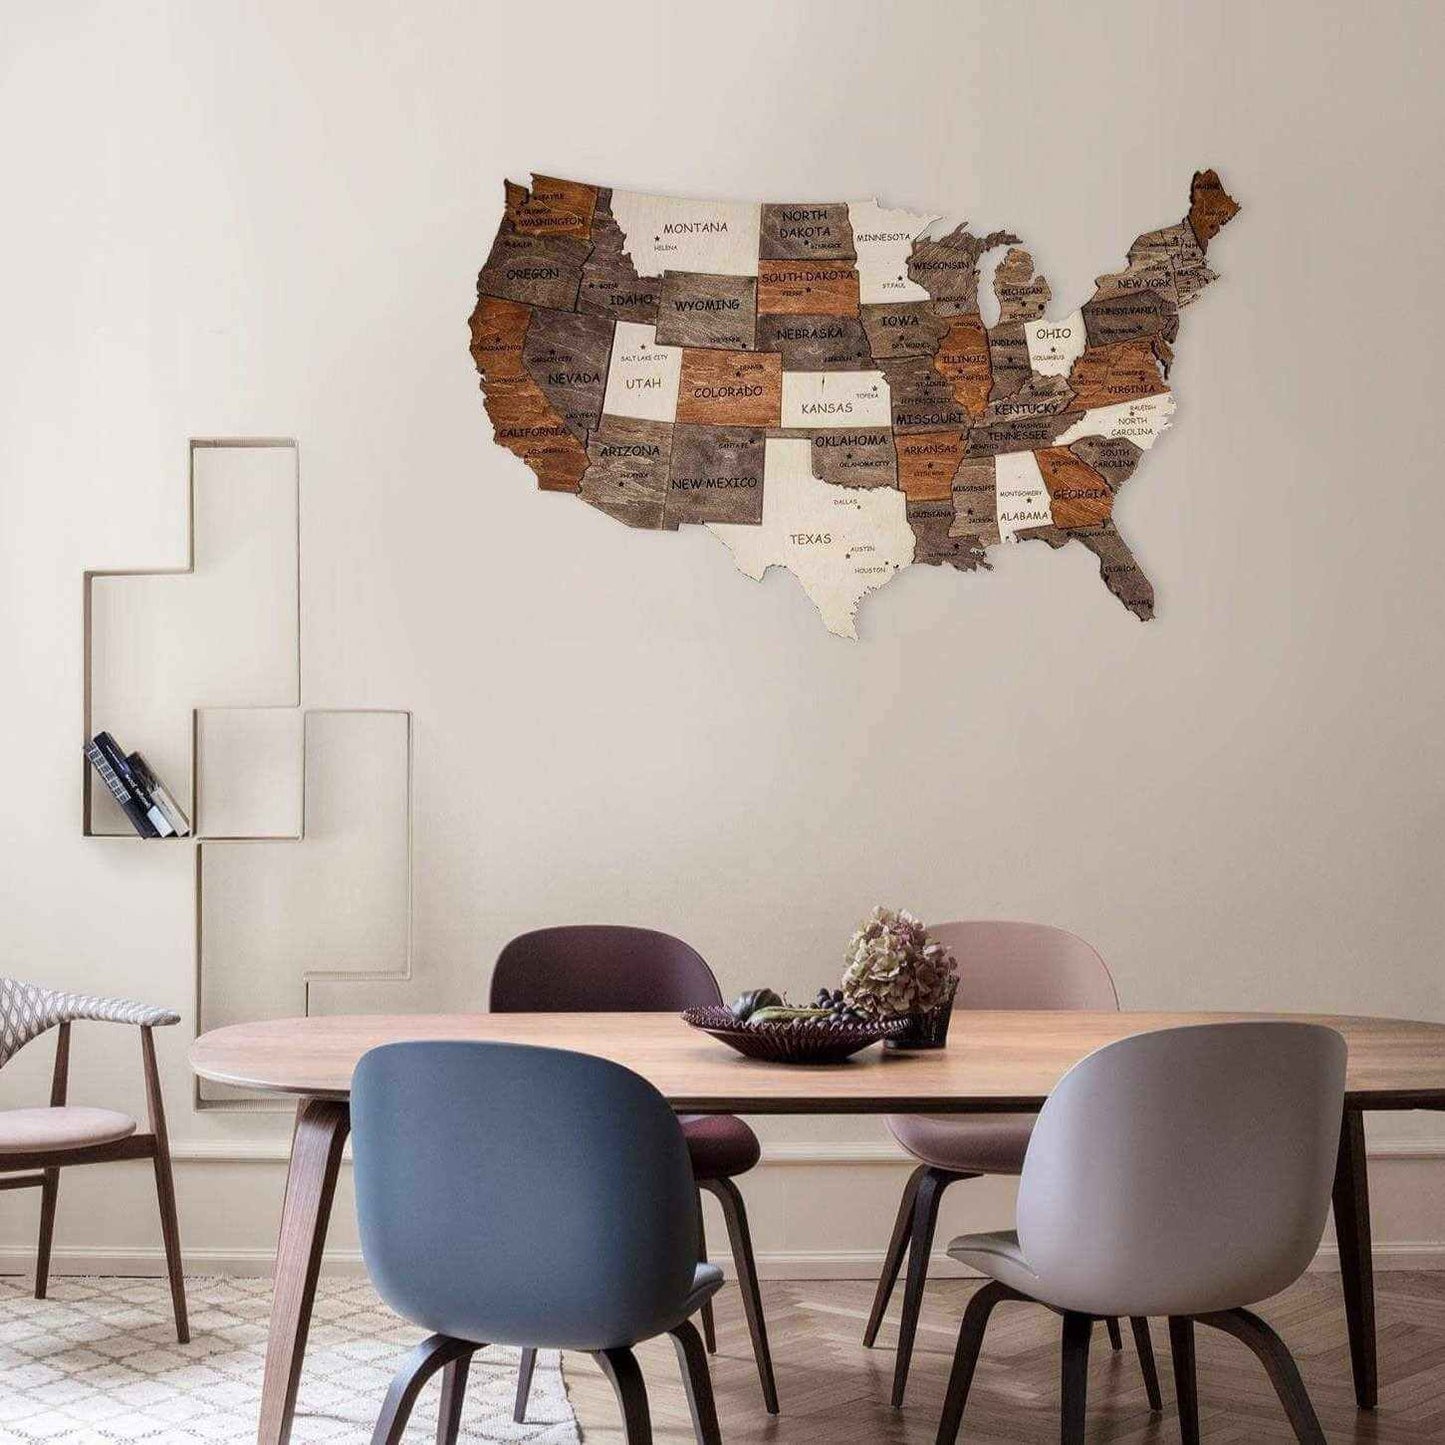 3D Wooden Map of the US in a Kitchen